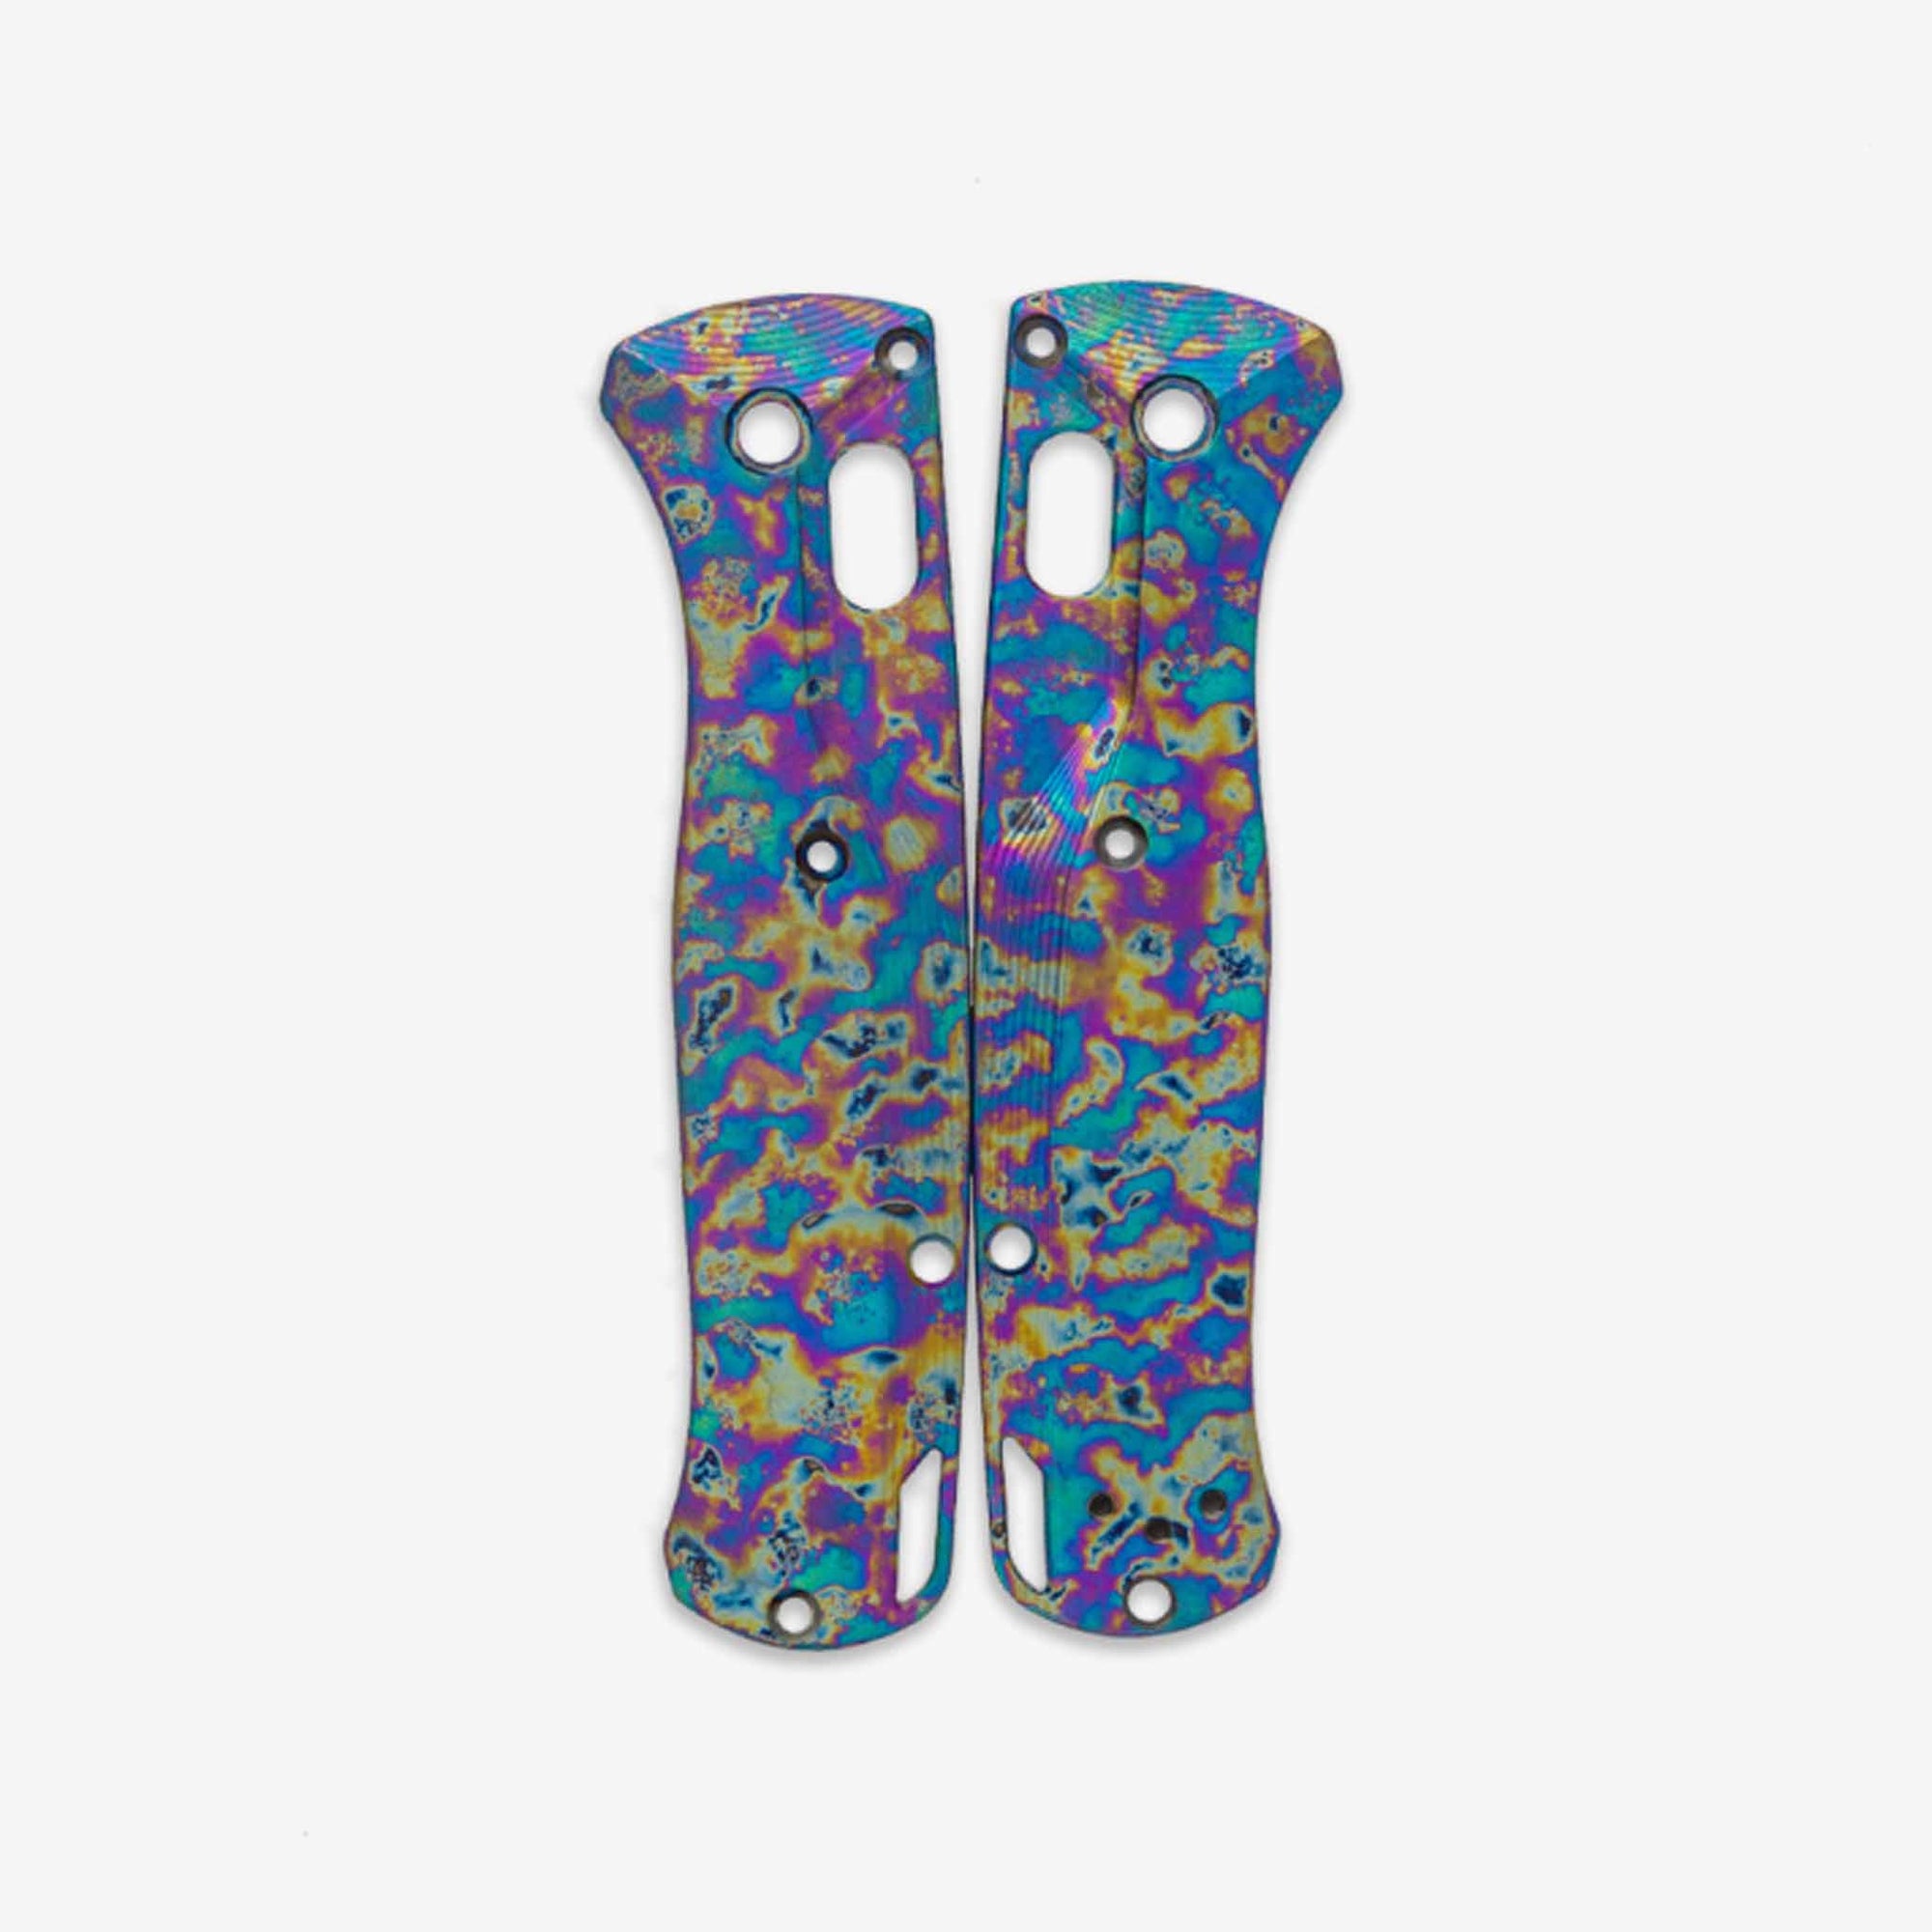 Limited edition kaleidoscope scales for the Benchmade Mini Bugout.